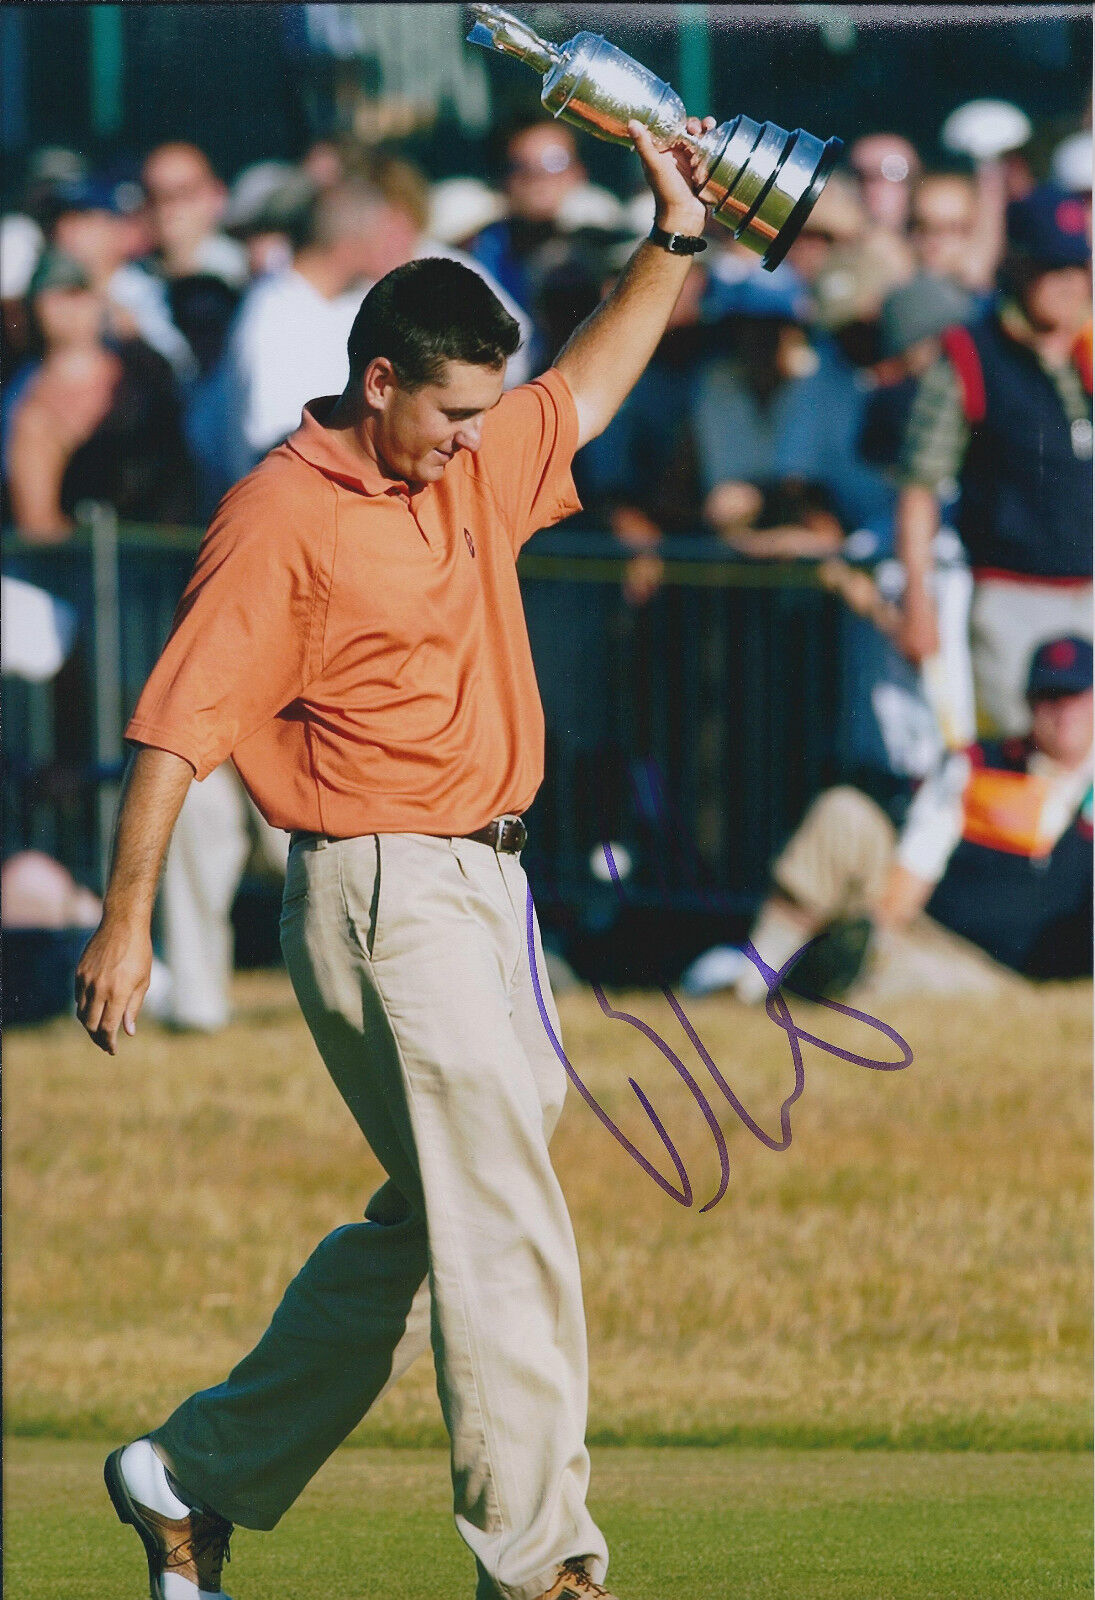 Ben CURTIS SIGNED Autograph 12x8 Photo Poster painting AFTAL COA Open CHAMPION Golf Winner